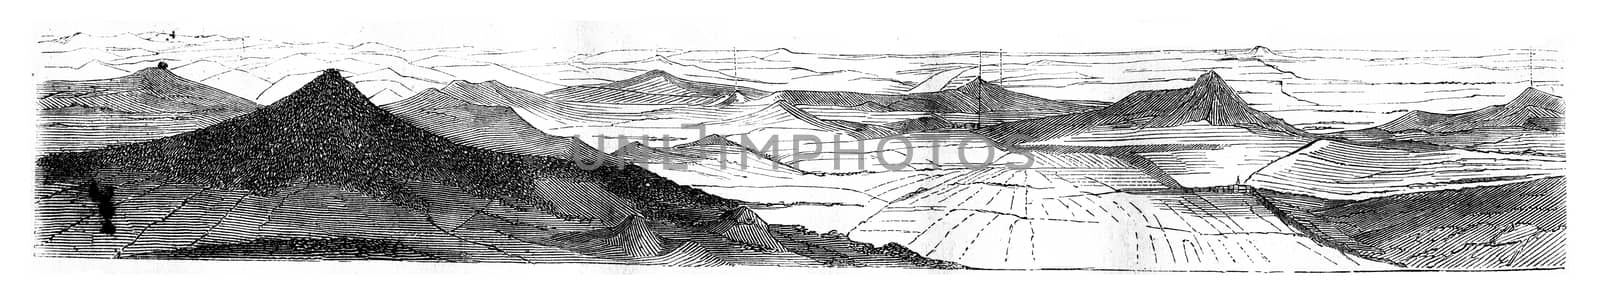 View of the west side, vintage engraved illustration. Magasin Pittoresque 1846.
